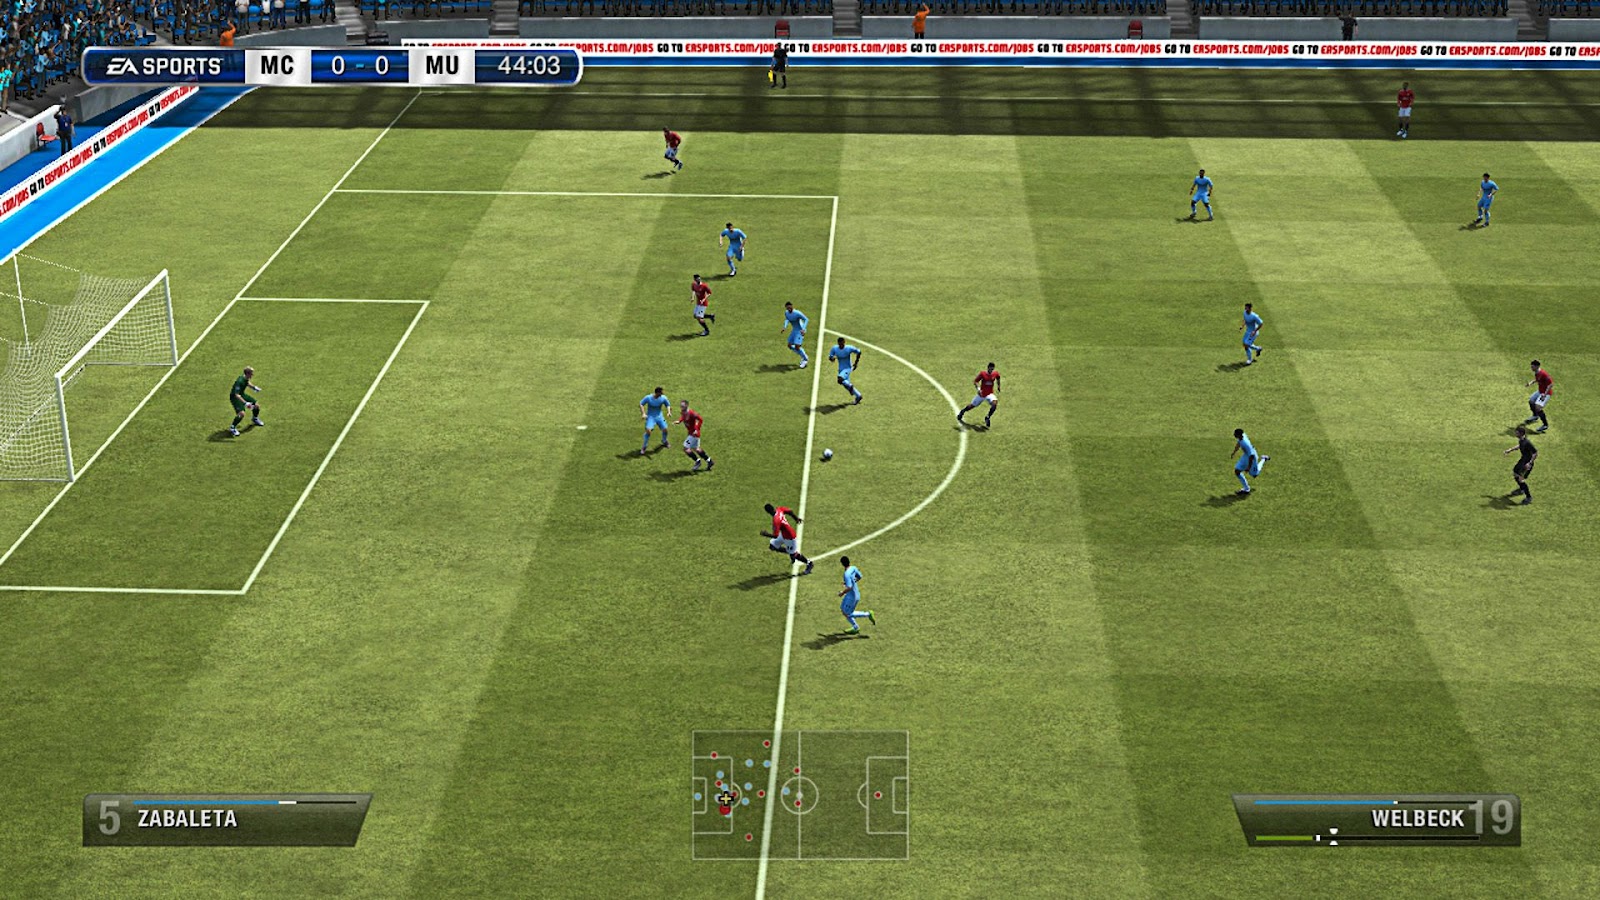 The World Of Gaming - Blog About Games: Fifa 13 or PES 13?